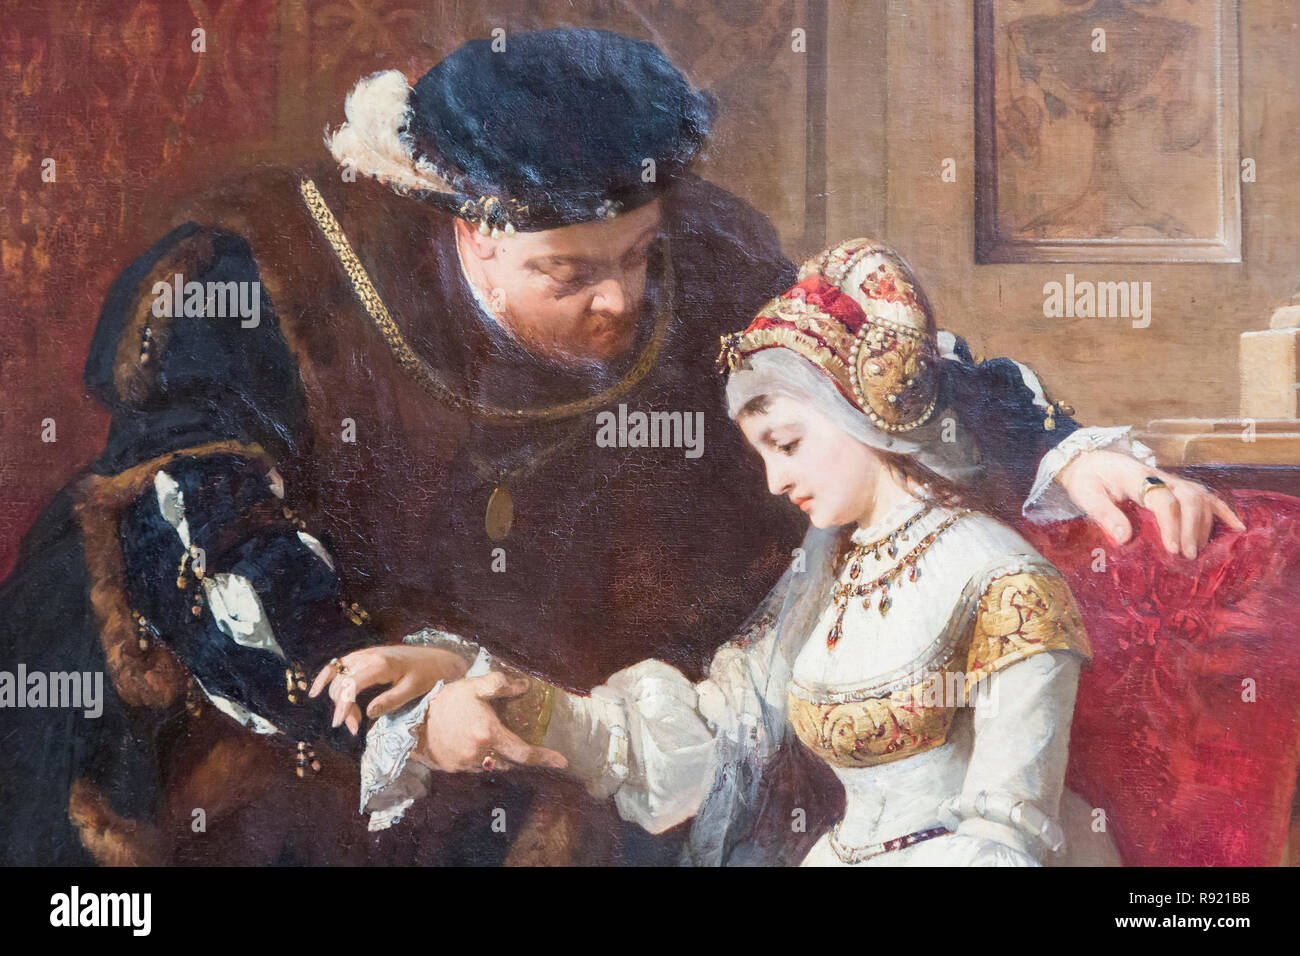 First Meeting Between Henry the Eighth and Anne Boleyn.  Henry VIII, 1491 – 1547. King of England. Anne Boleyn, c. 1501-1536.  Queen of England as the Stock Photo